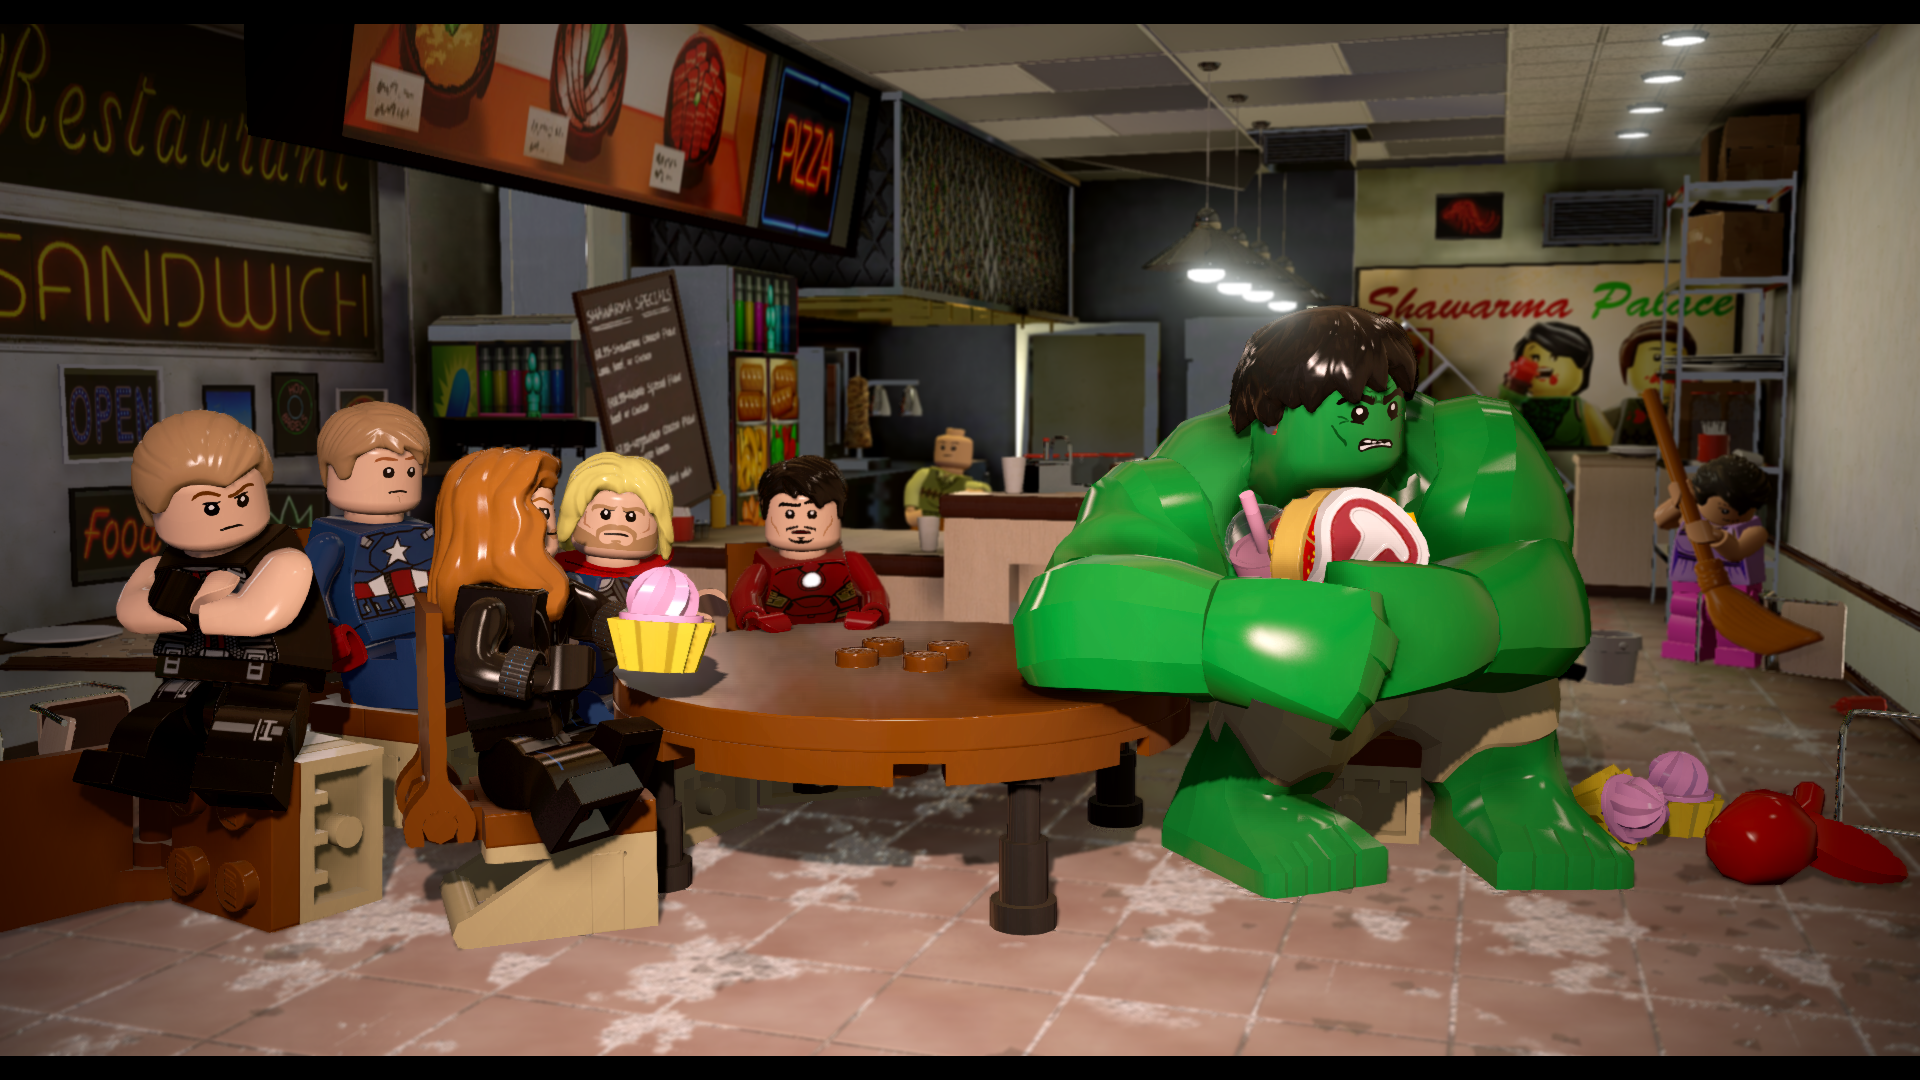 free download lego marvels avengers game